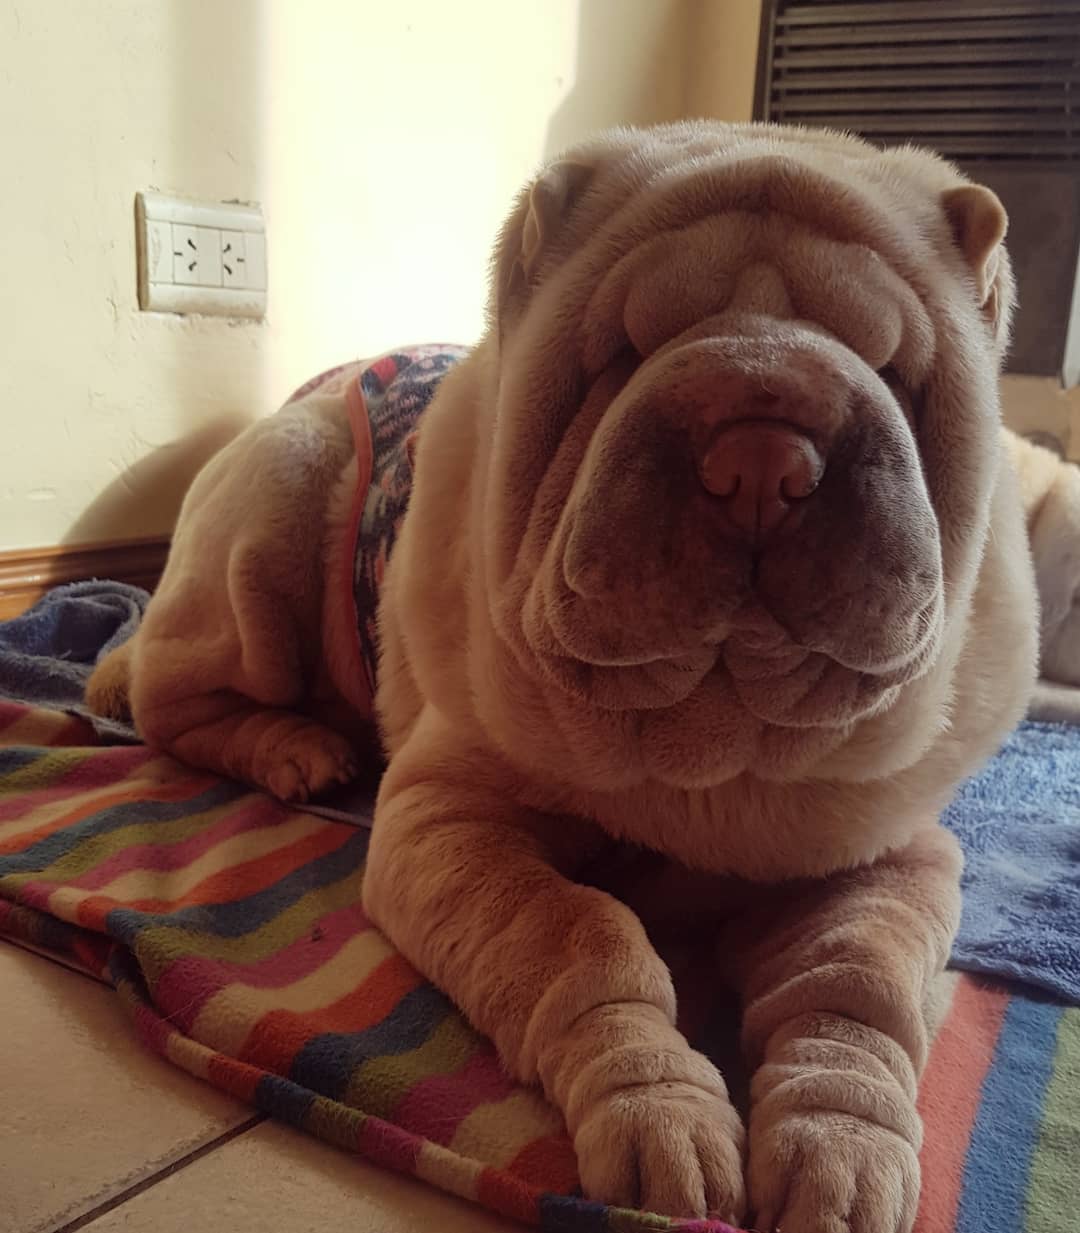 A Shar Pei lying on the bed